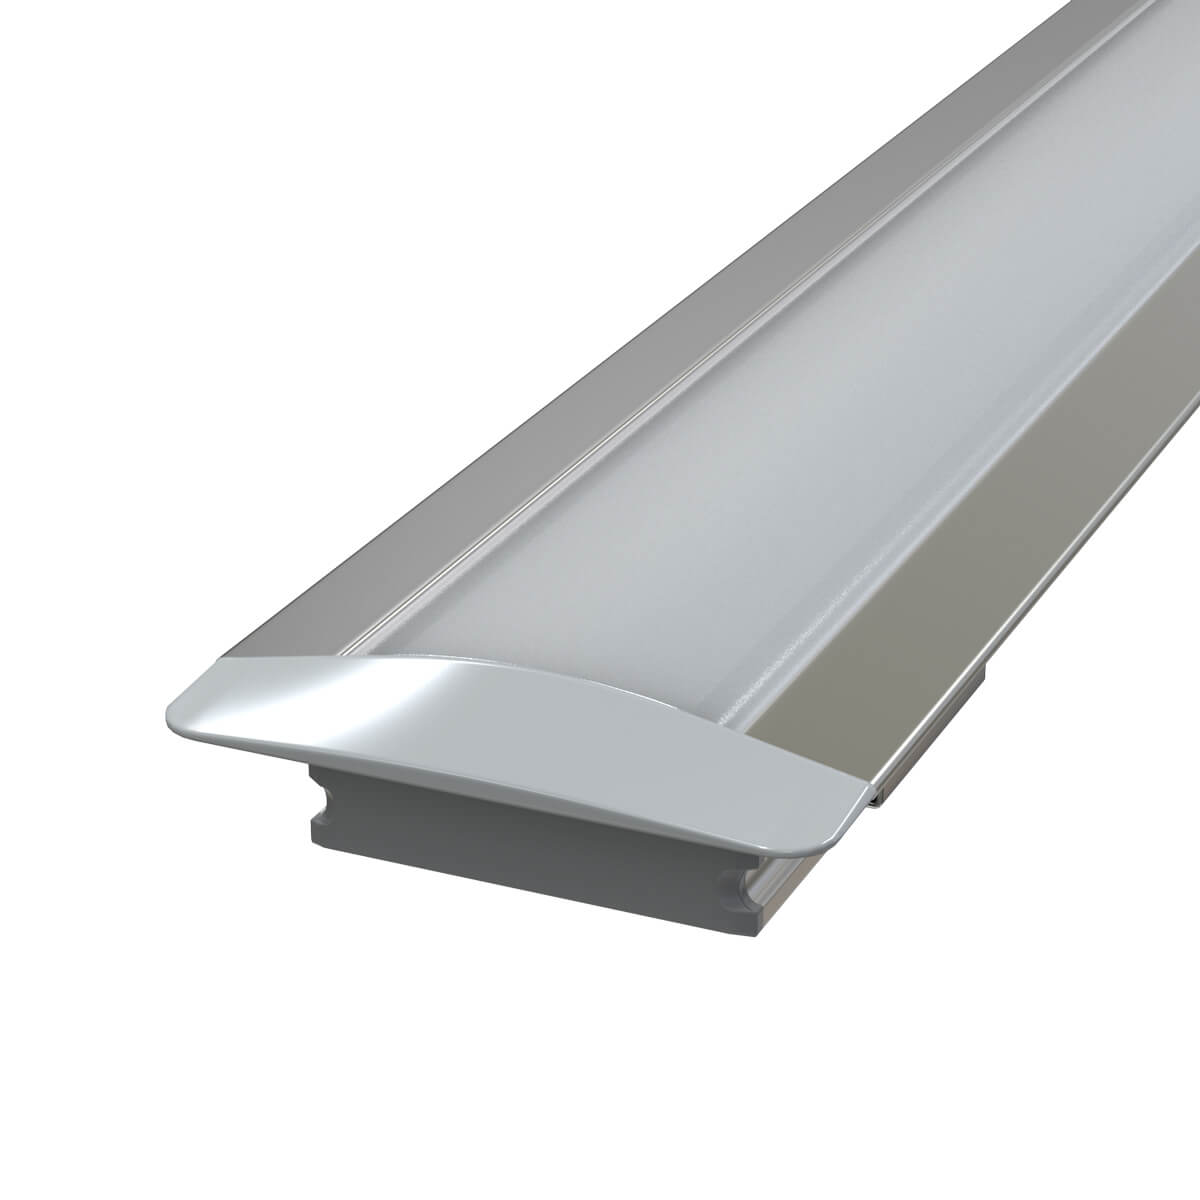 View 2m Long Shallow 7mm Recessed LED Aluminium Profile information